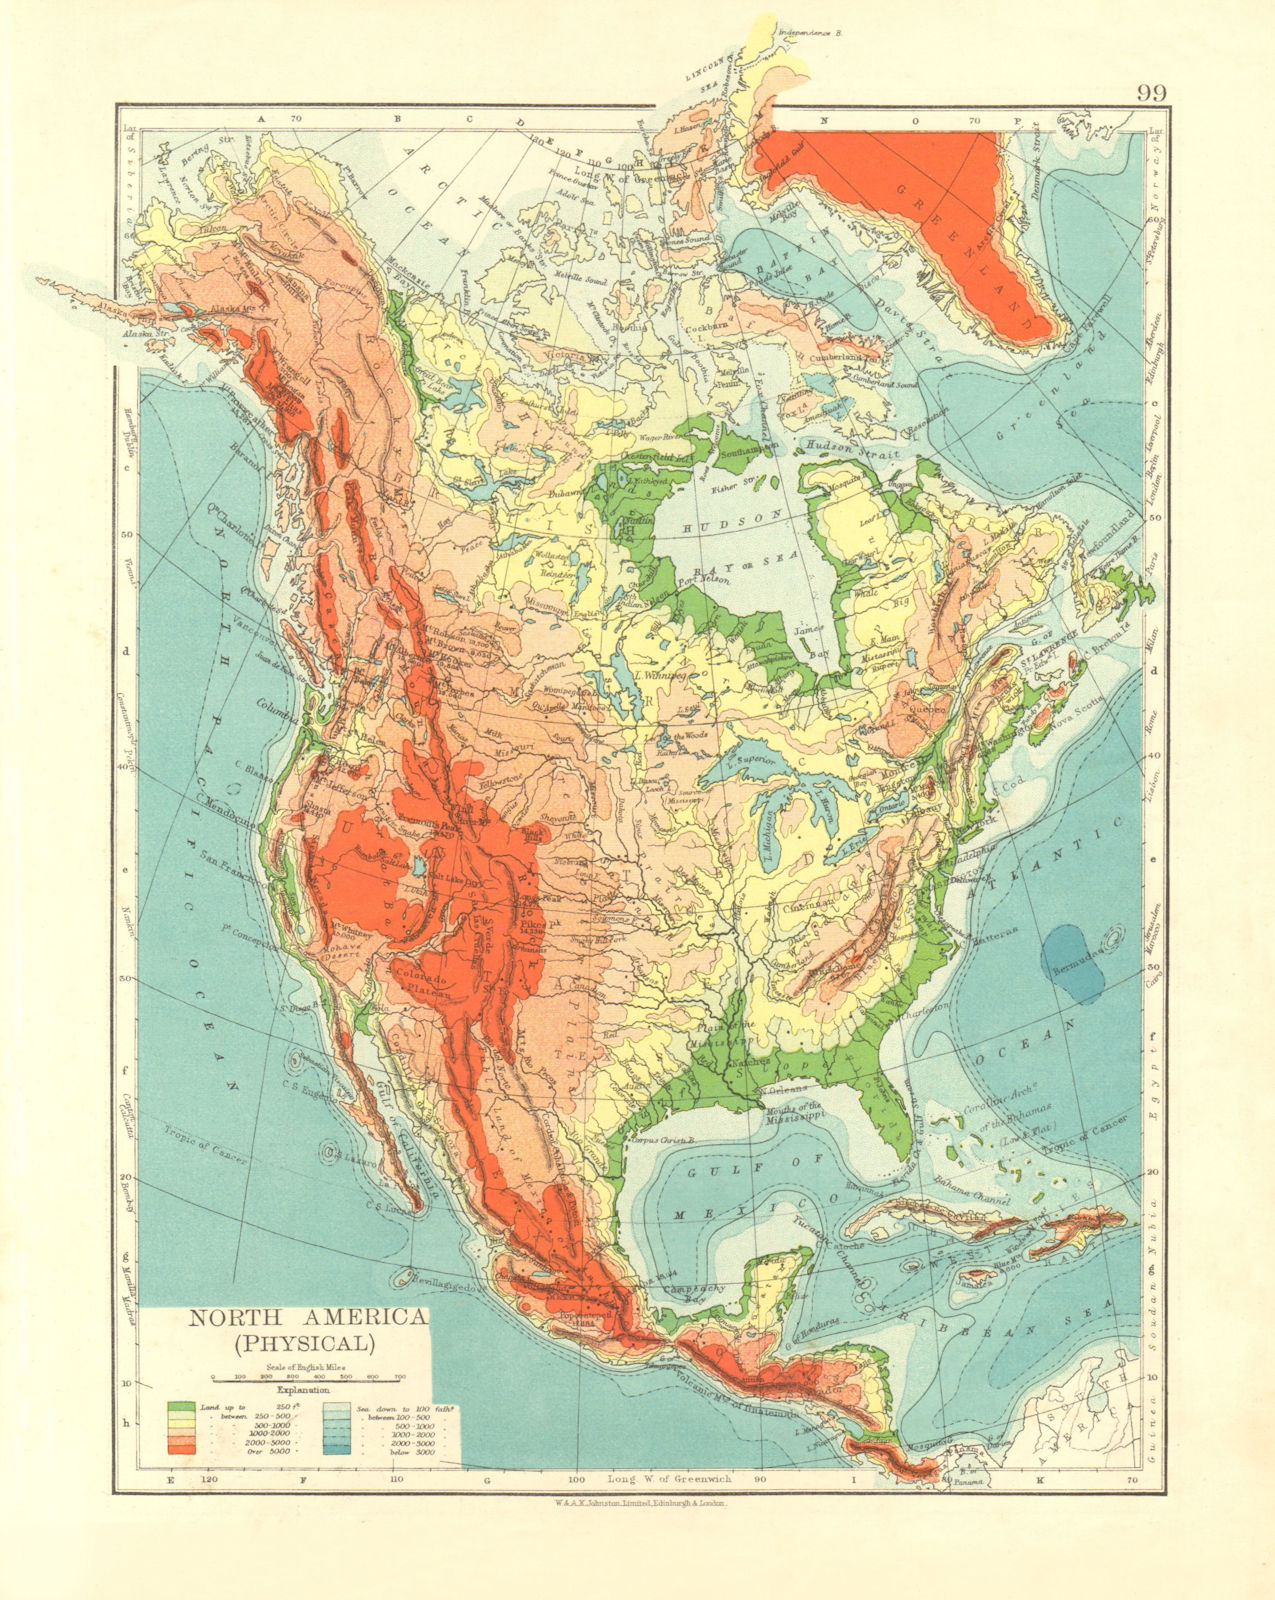 NORTH AMERICA PHYSICAL. Relief. Key mountains heights. Ocean depths  1906 map